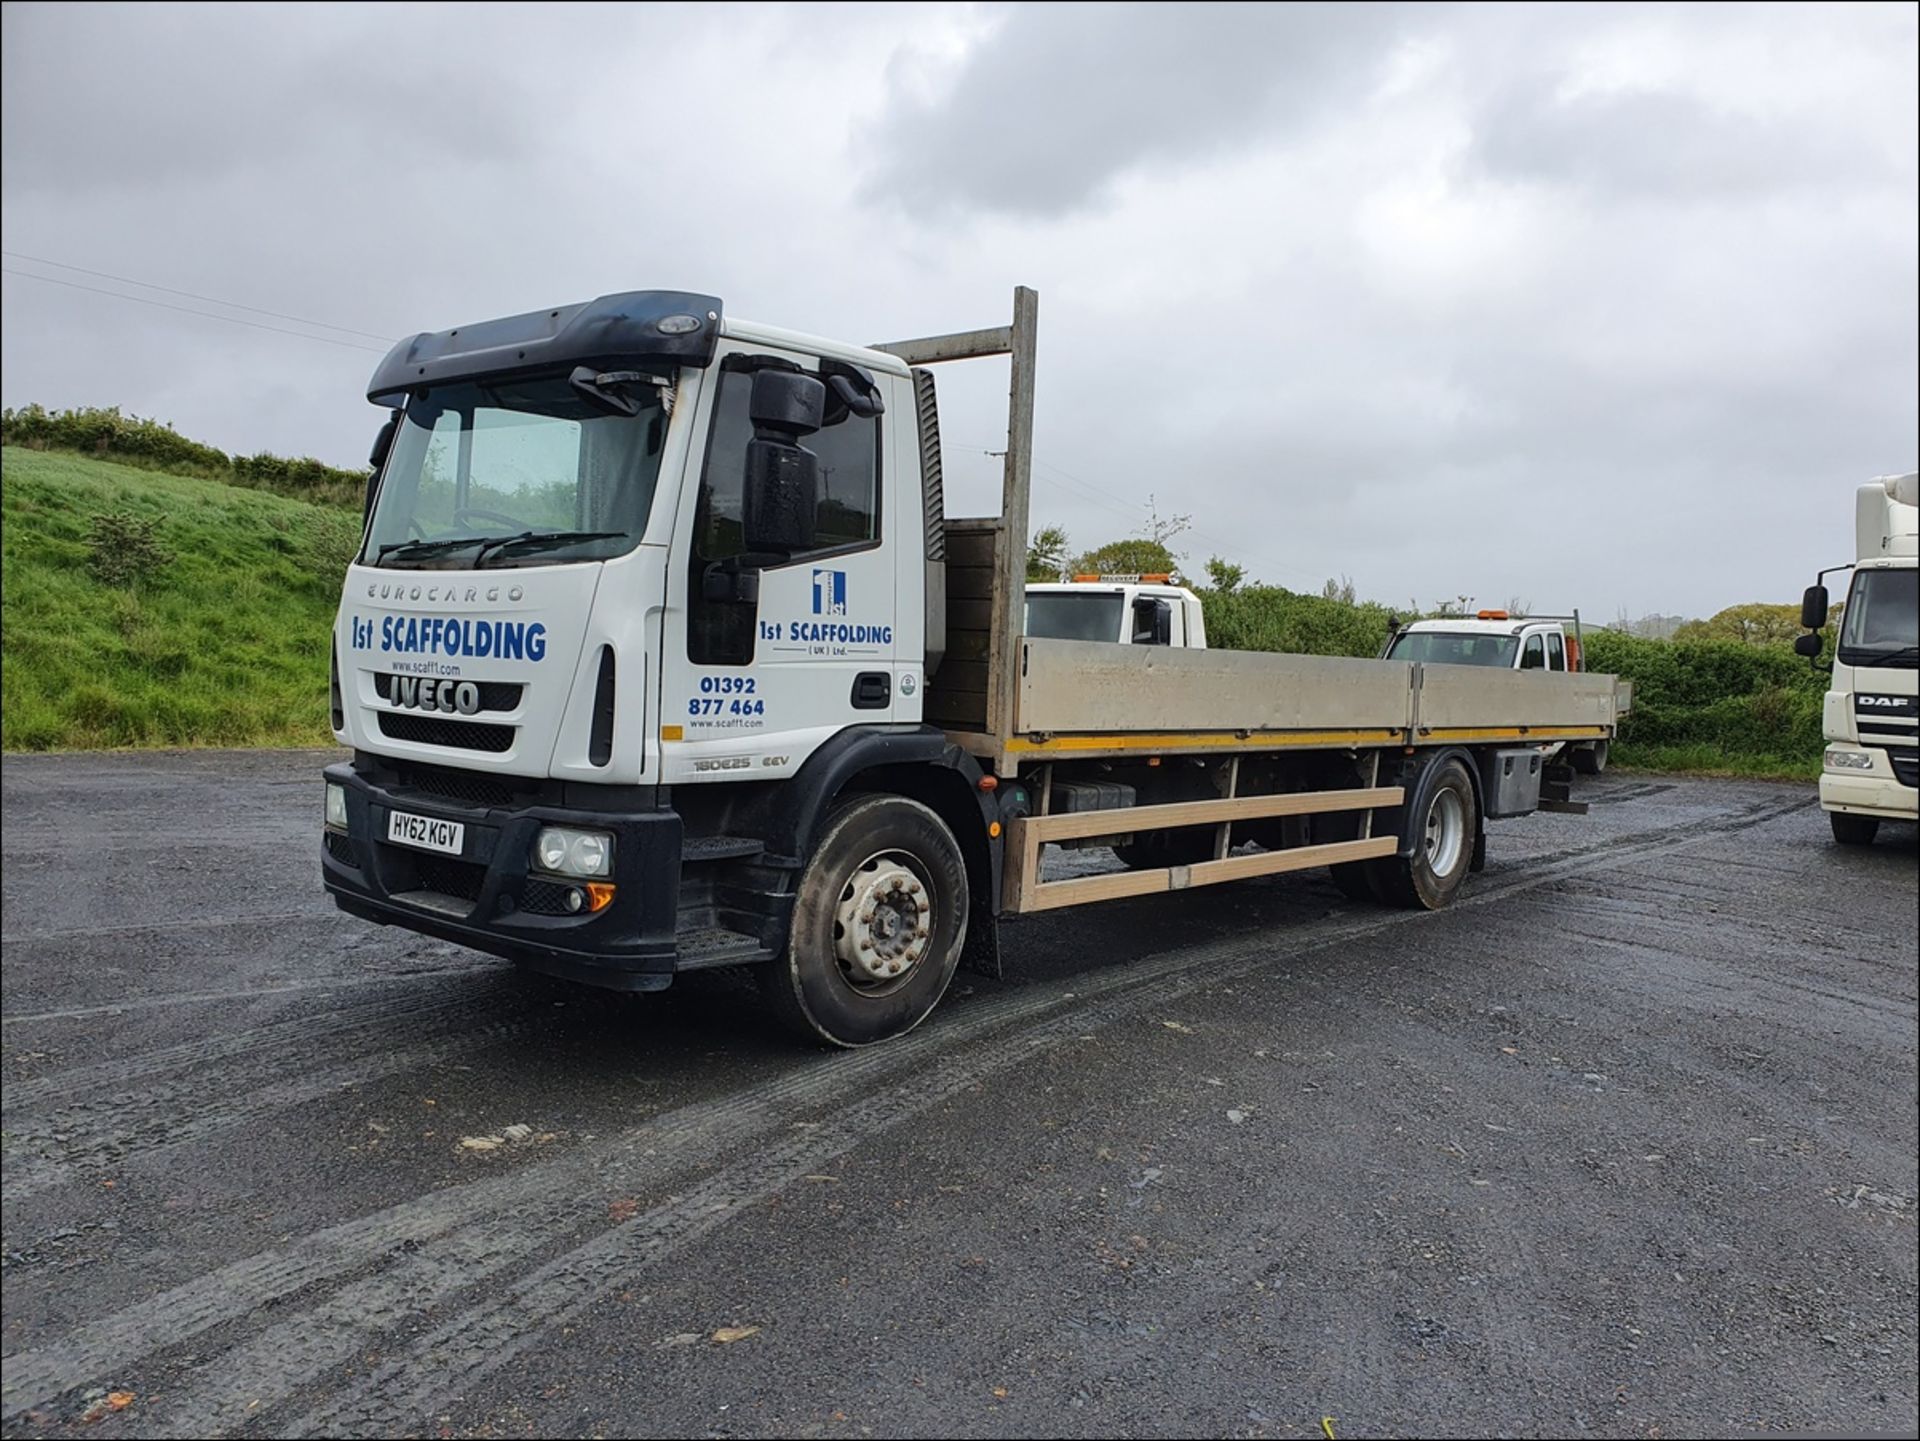 12/62 IVECO EUROCARGO (MY 2008) - 5880cc 2dr Flat Bed (White, 148k) - Image 12 of 16